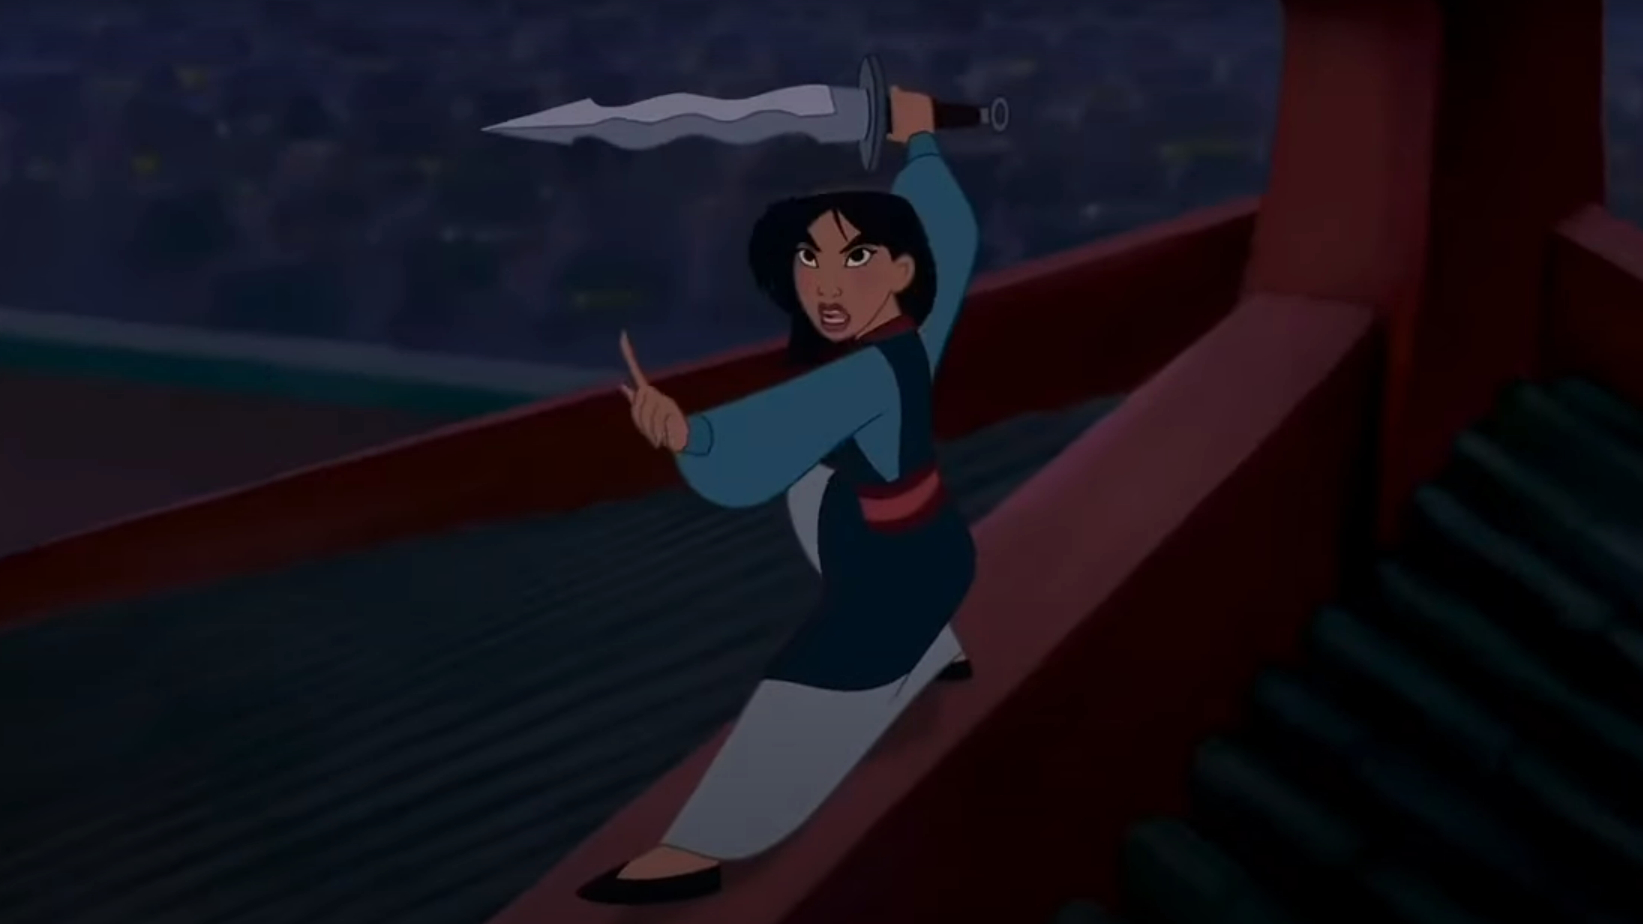 Mulan in animated film, holding a sword with determination, ready to defend